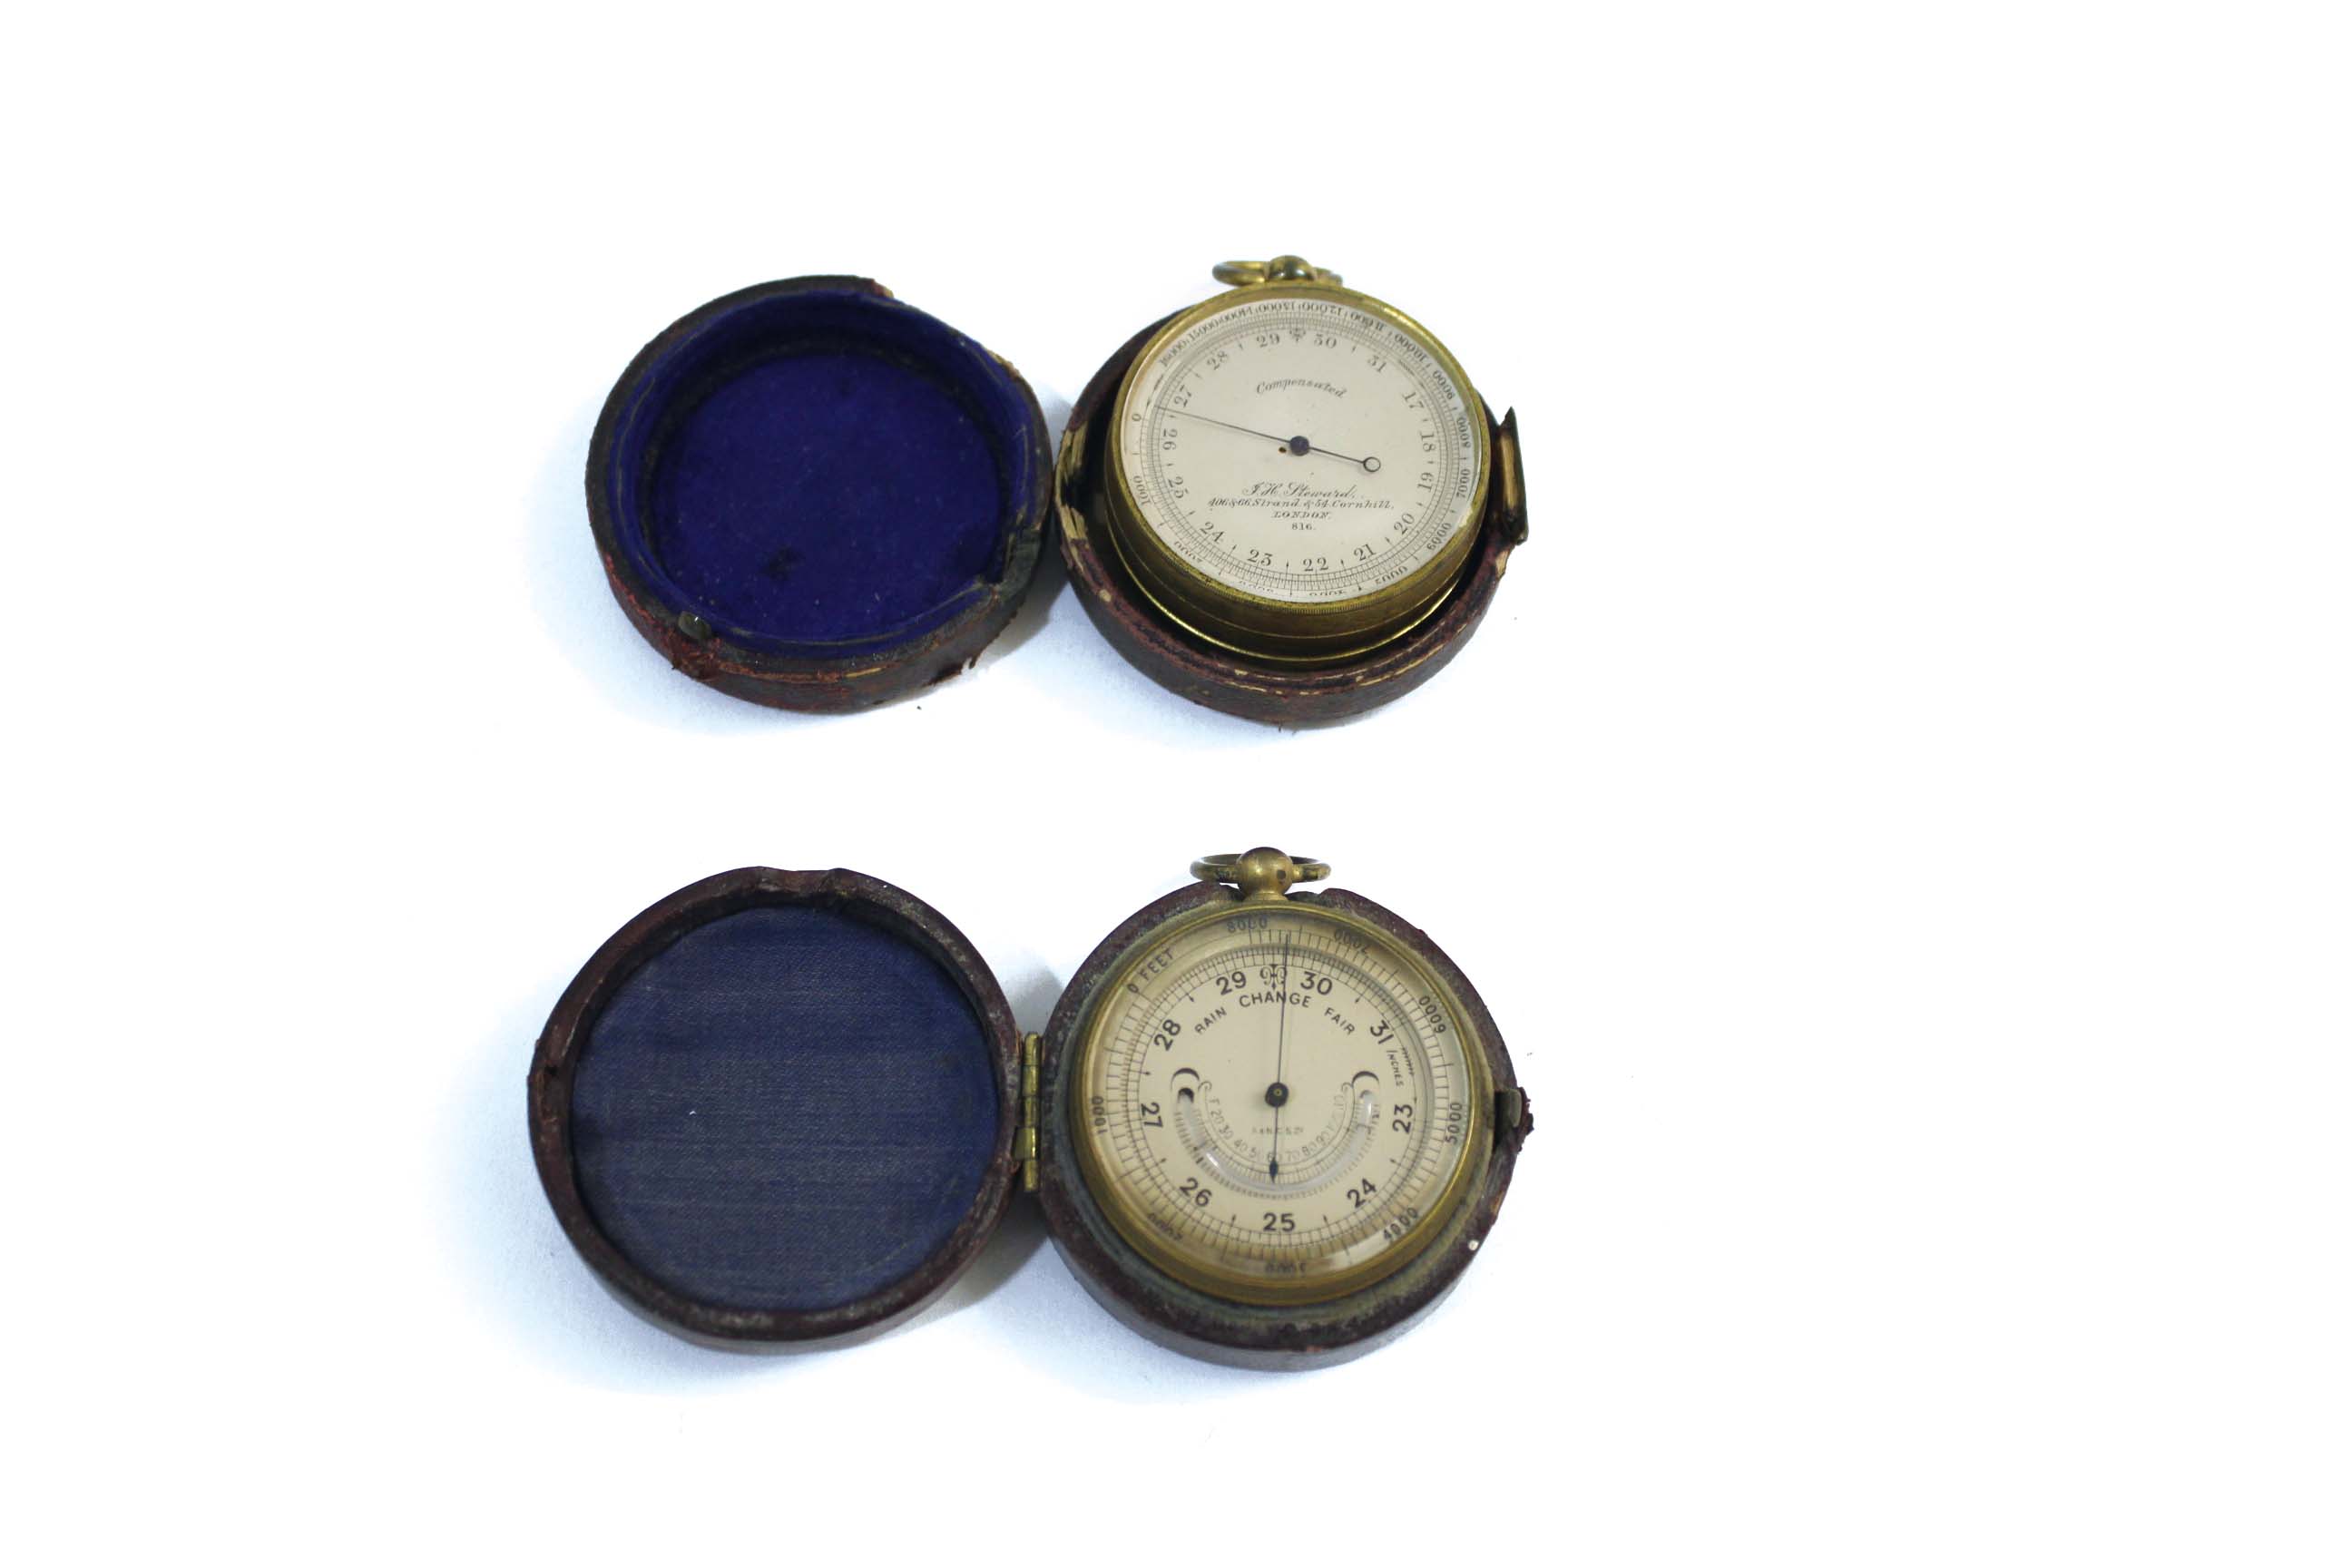 TWO POCKET BAROMETERS including a brass pocket barometer by F H Steward, London, with a silvered